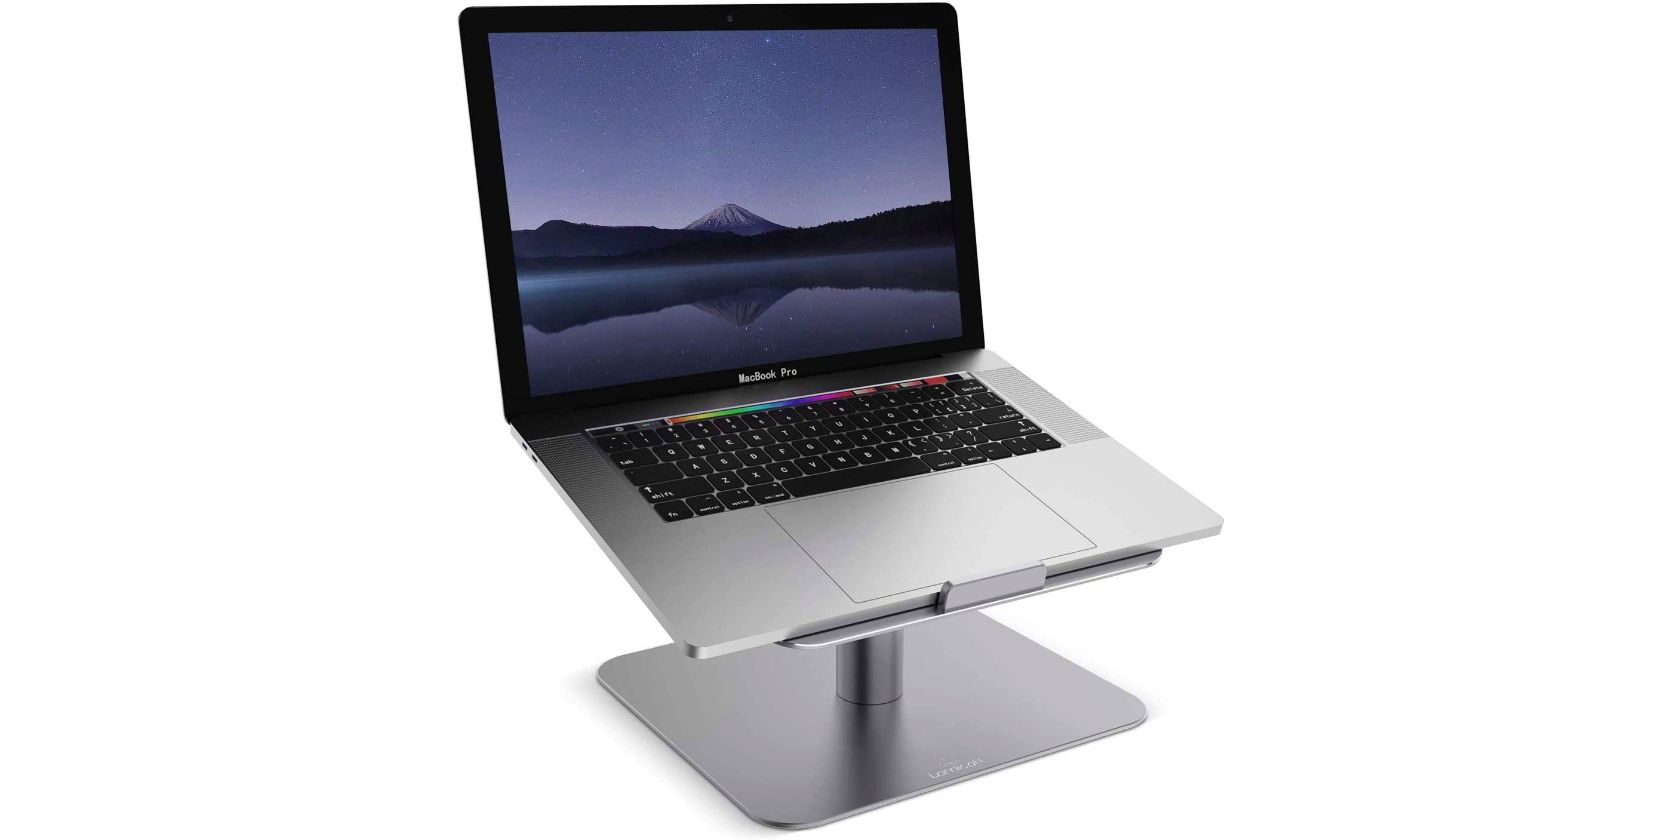 Lamicall Swivel laptop stand product image 1